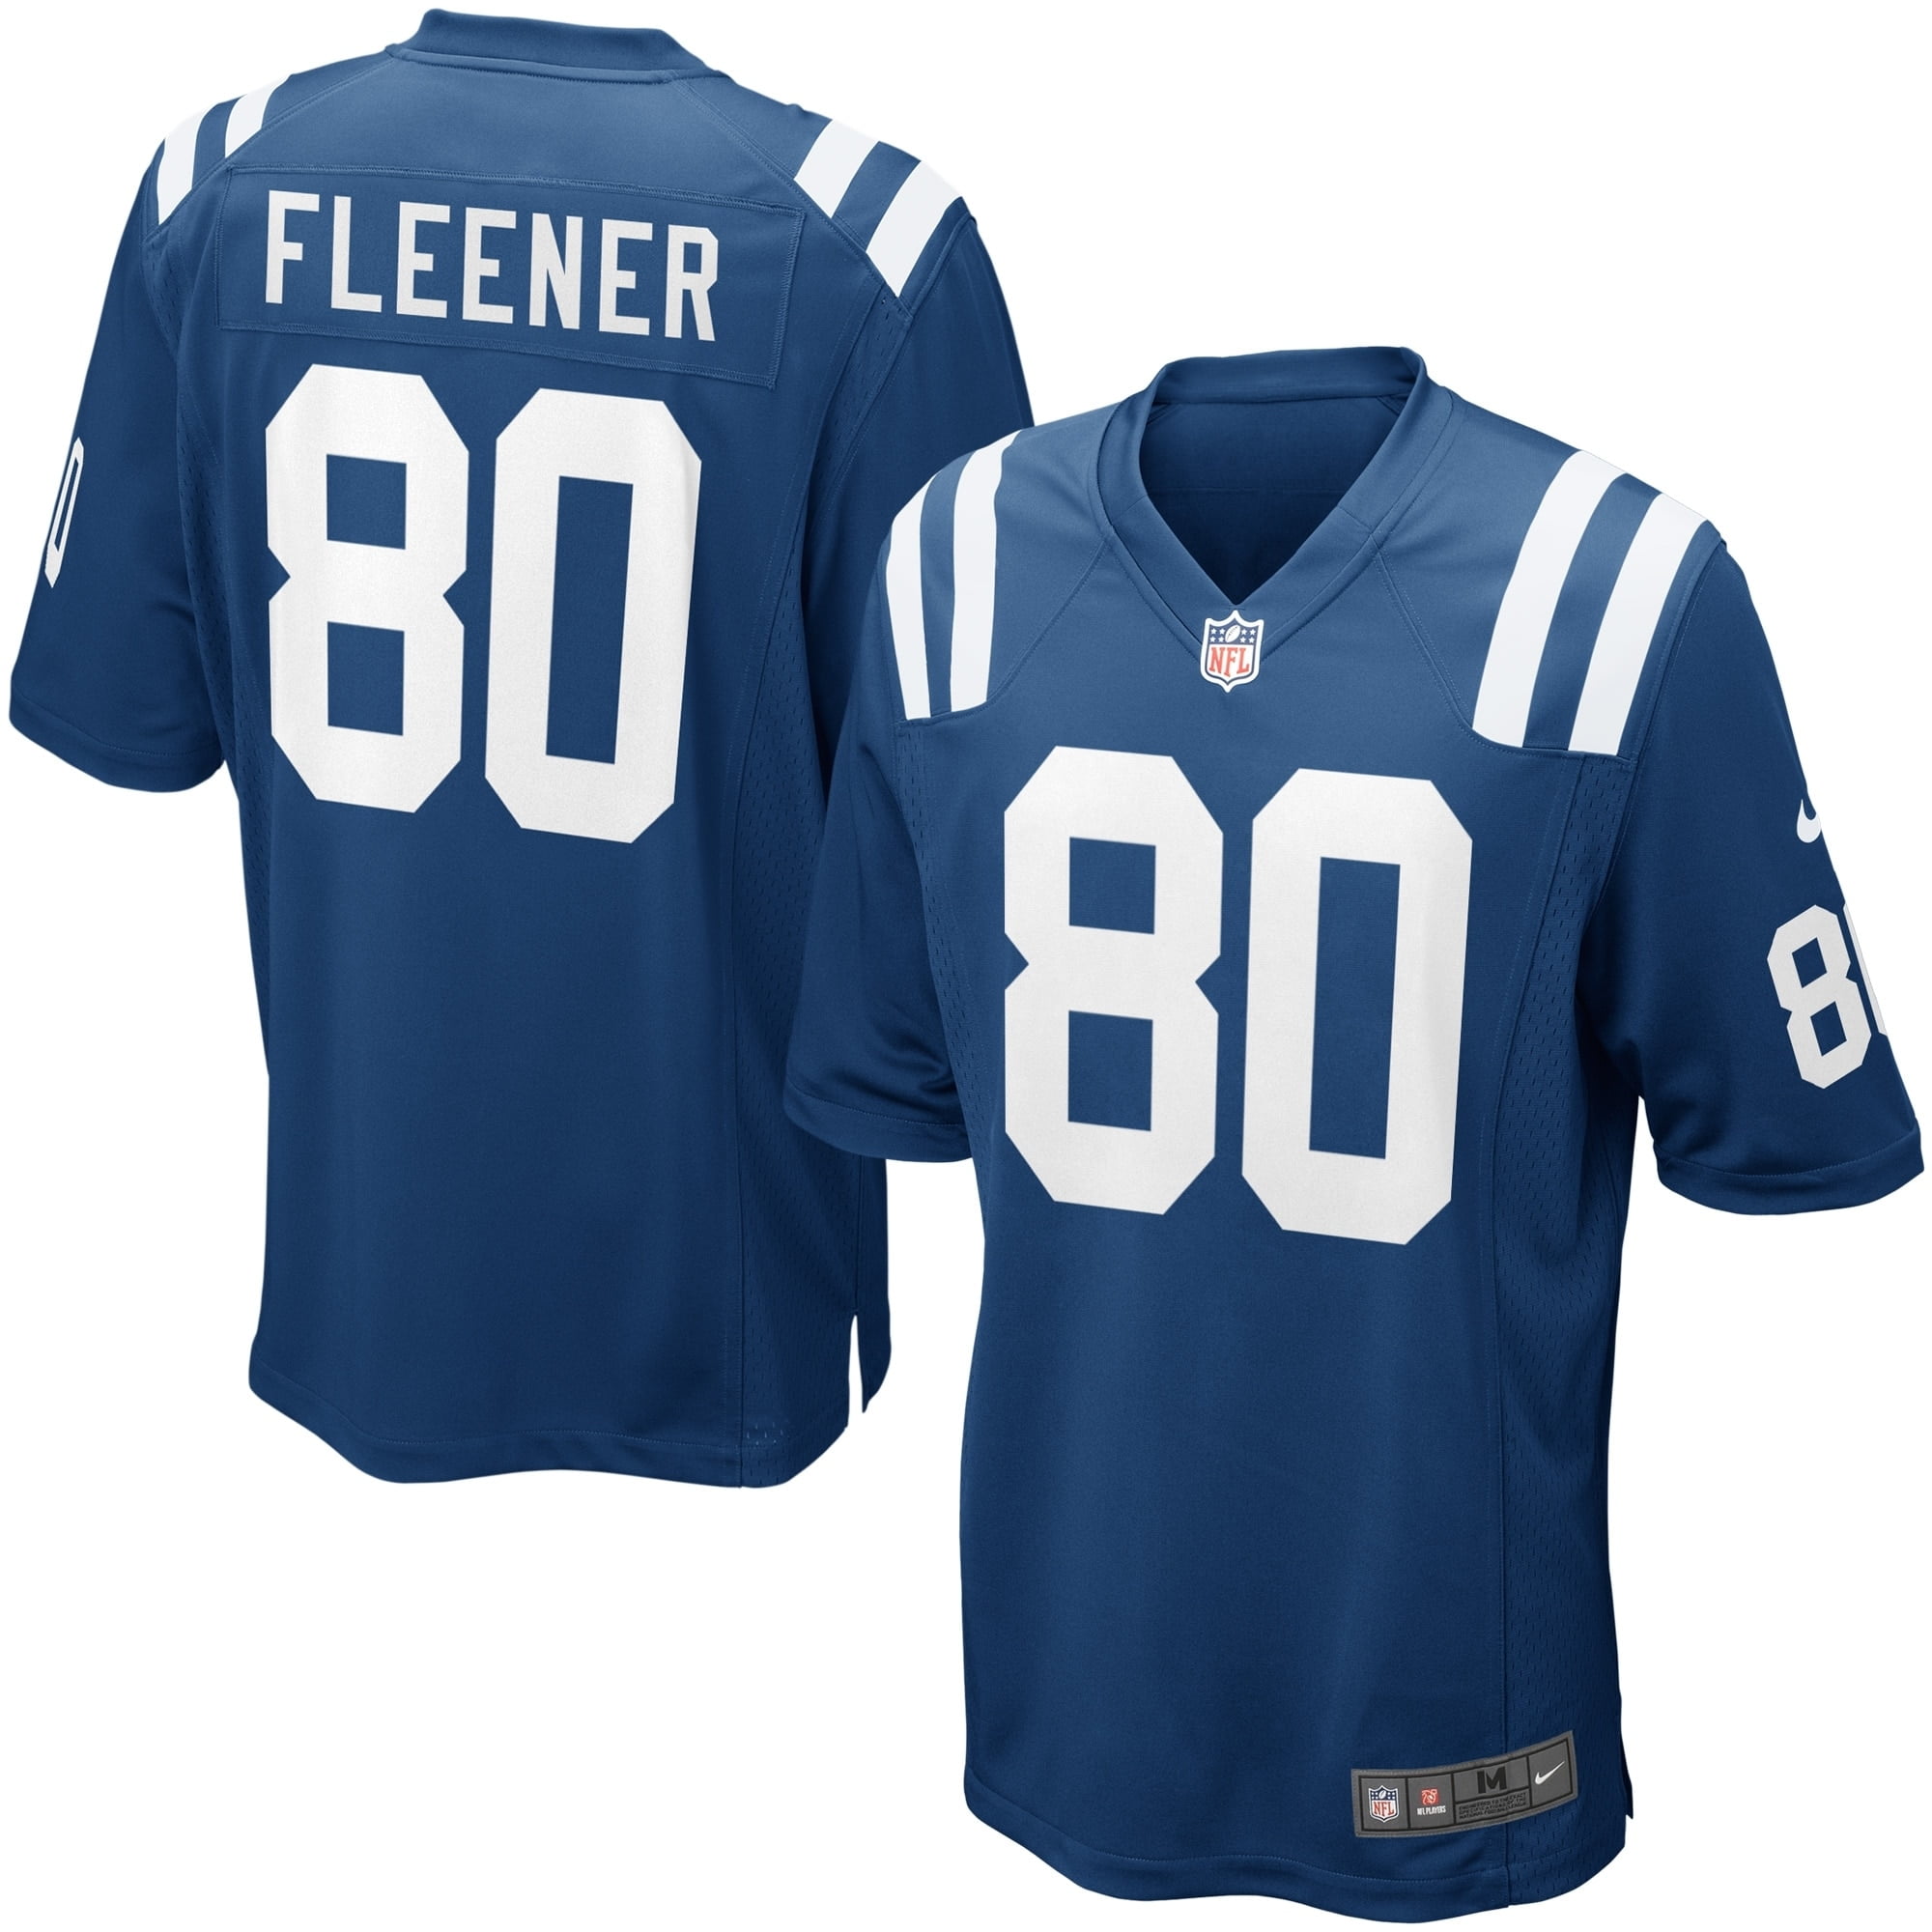 Coby Fleener Indianapolis Colts Nike Youth Team Color Game Jersey - Royal Blue - Walmart.com